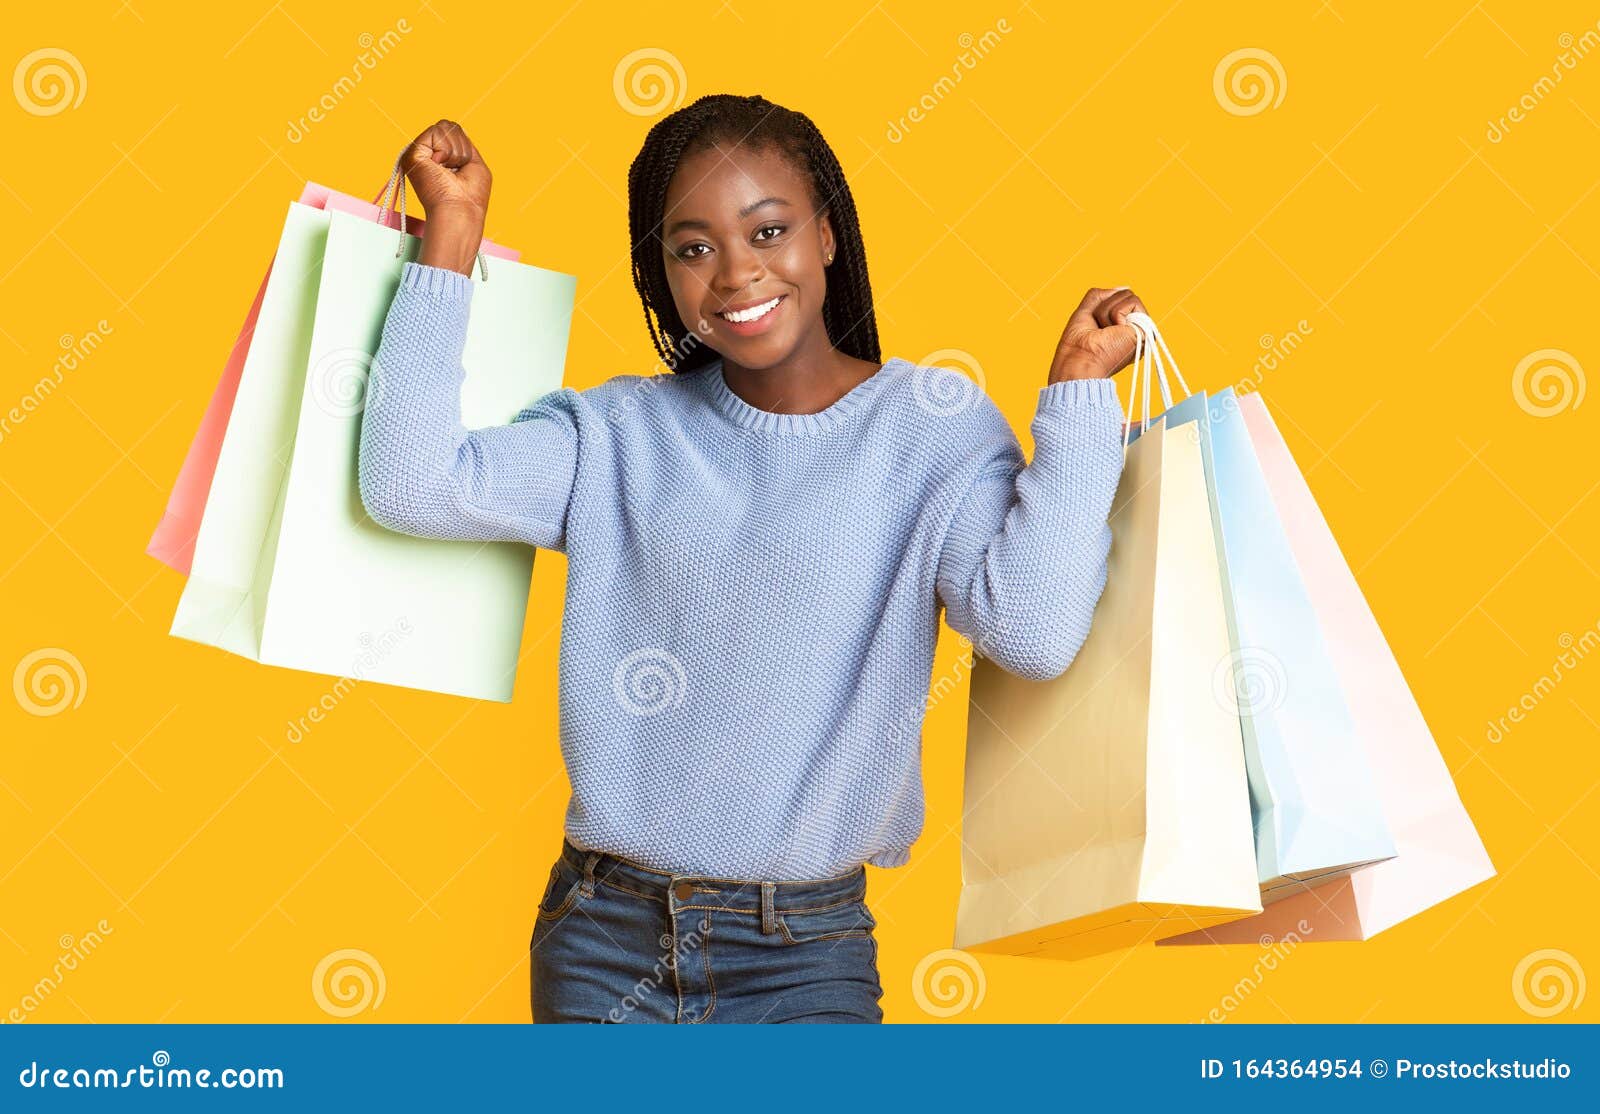 Happy Black Girl Raising Hands Up with Purchases Stock Photo - Image of ...